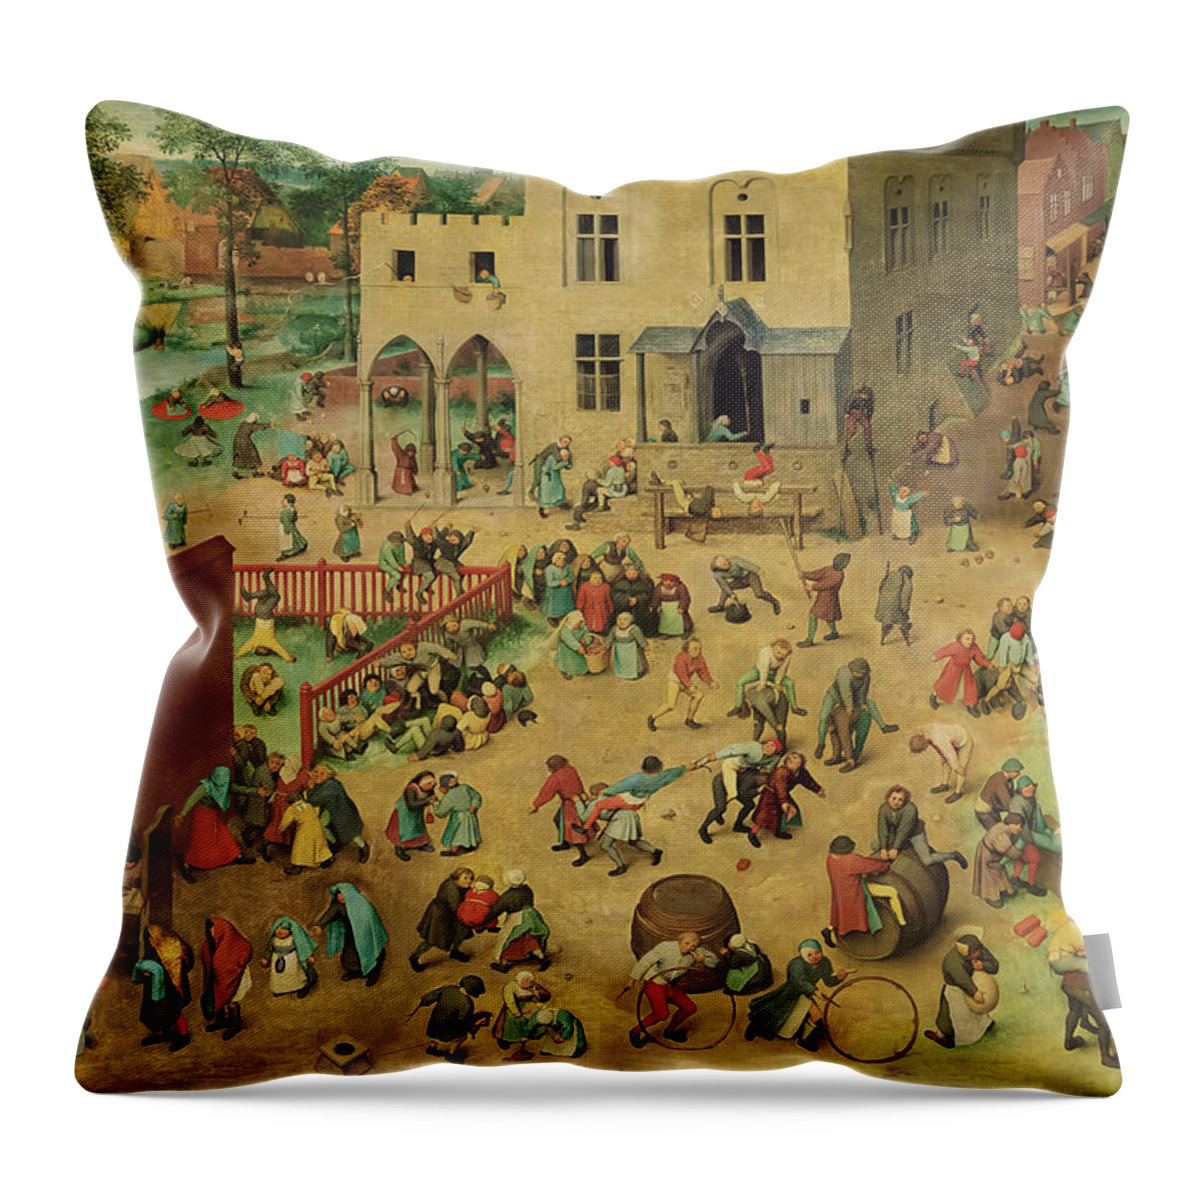 Flemish Throw Pillow featuring the painting Children's Games by Pieter Brueghel the Elder by Mango Art